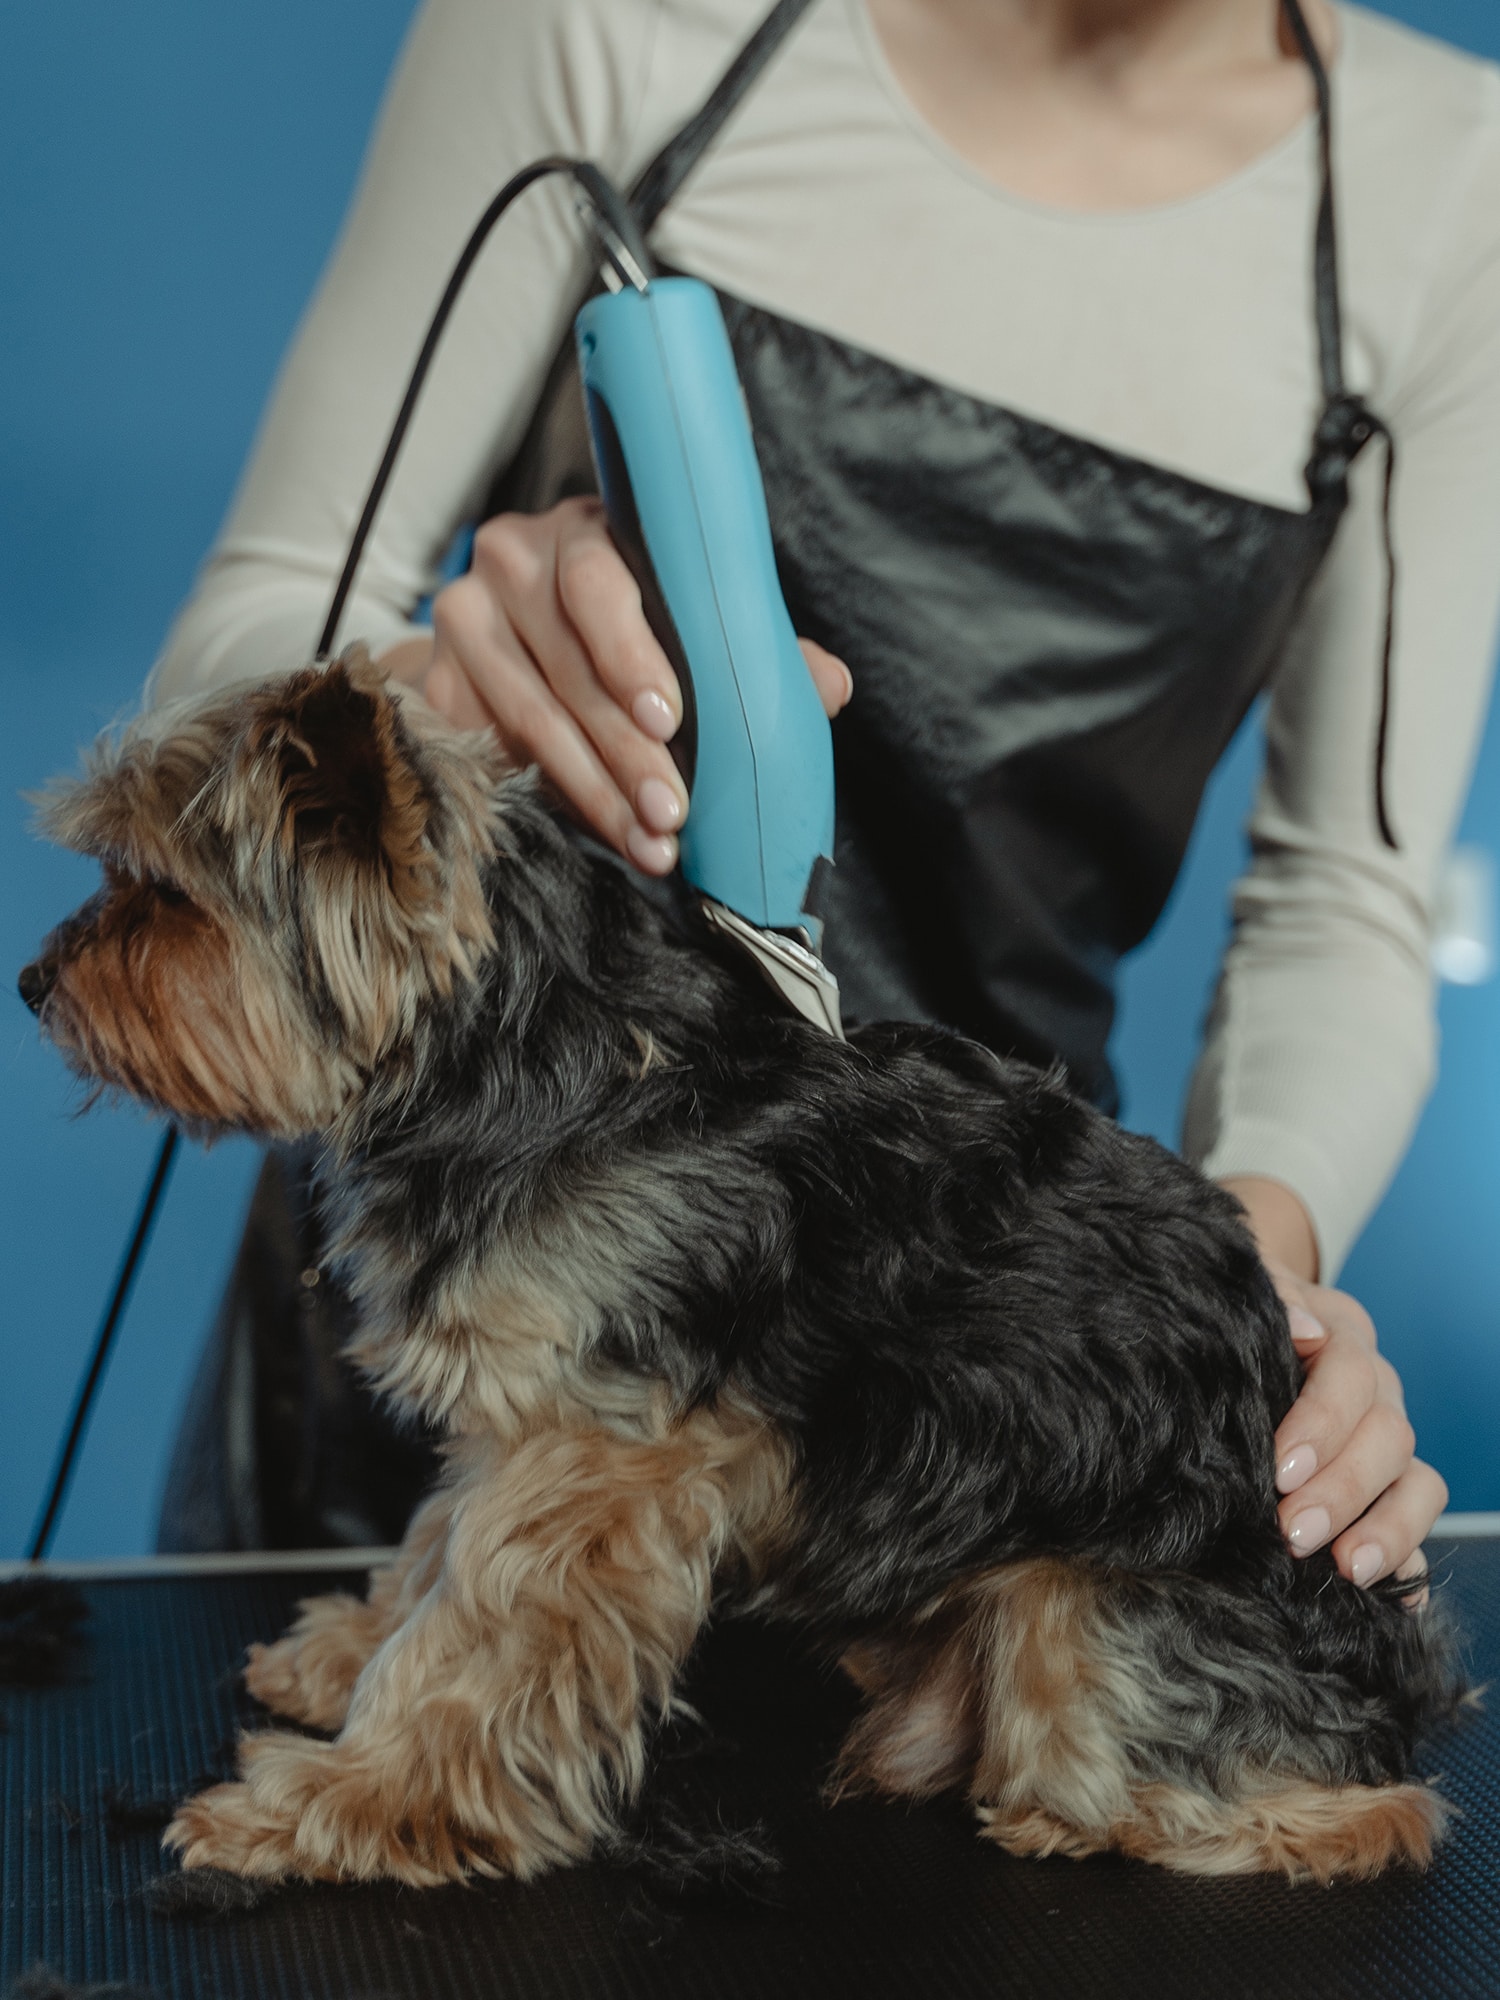 how often should I get my dog groomed? Dog grooming frequency depends on the dog's breed and haircut